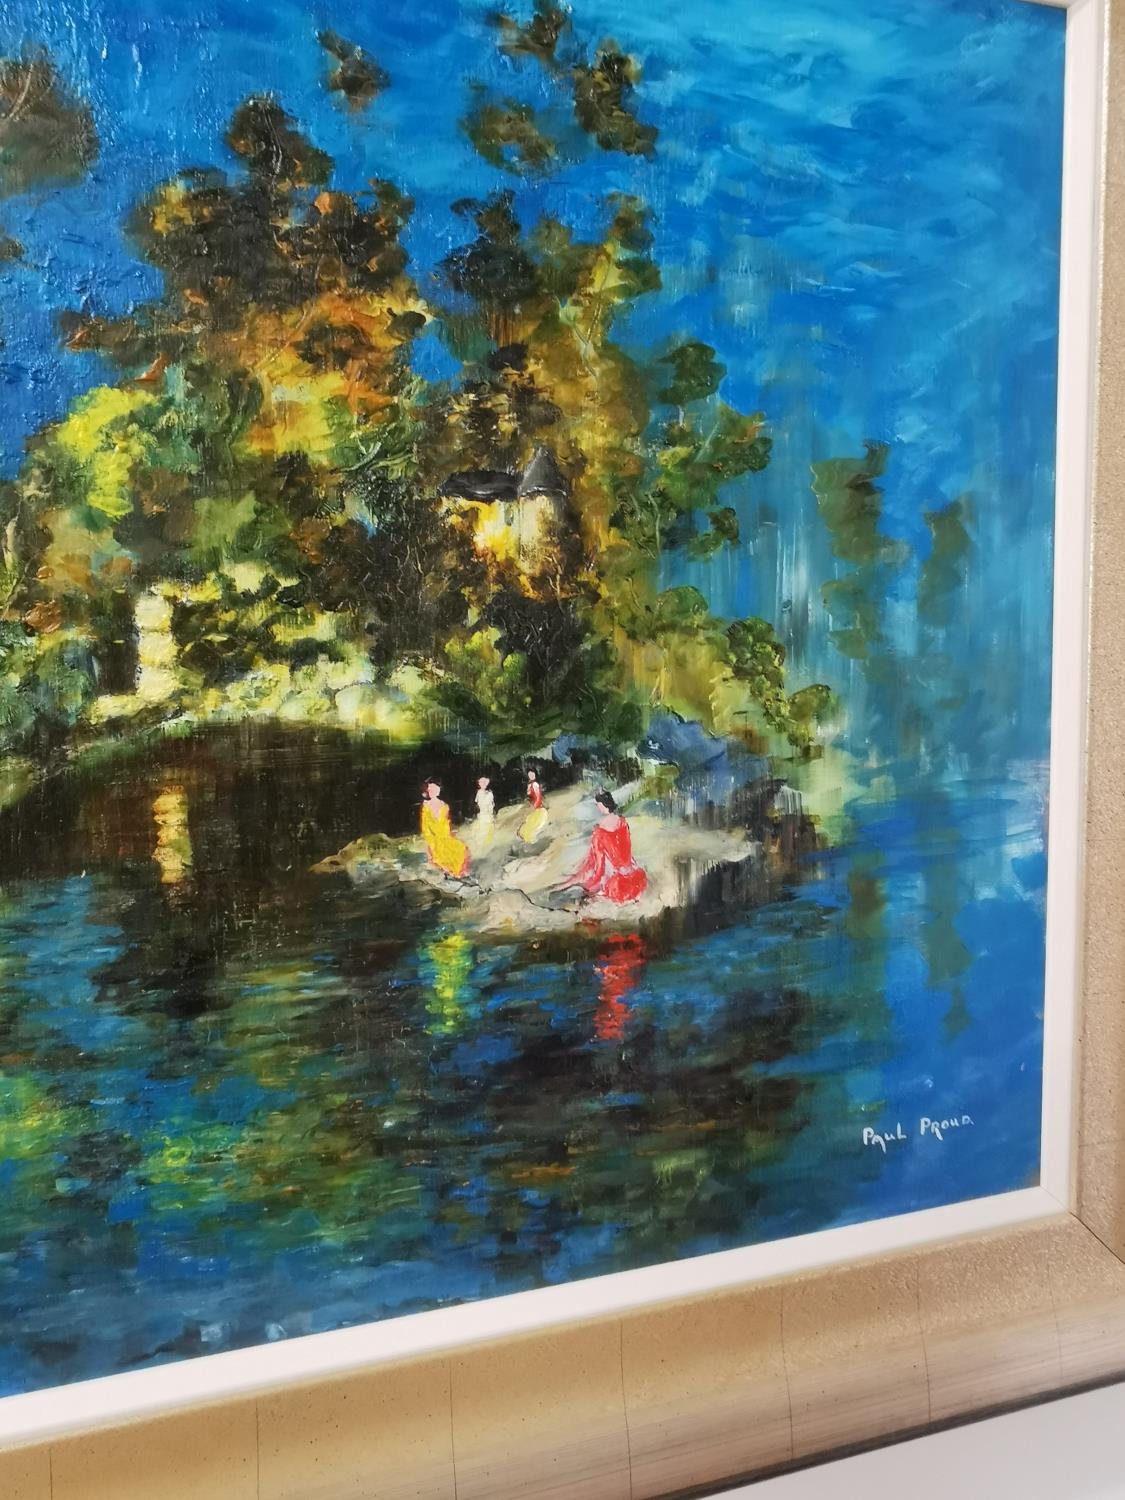 Paul Proud - Oil on Board - Untitled Woodland and Lake Scene - Image 3 of 3